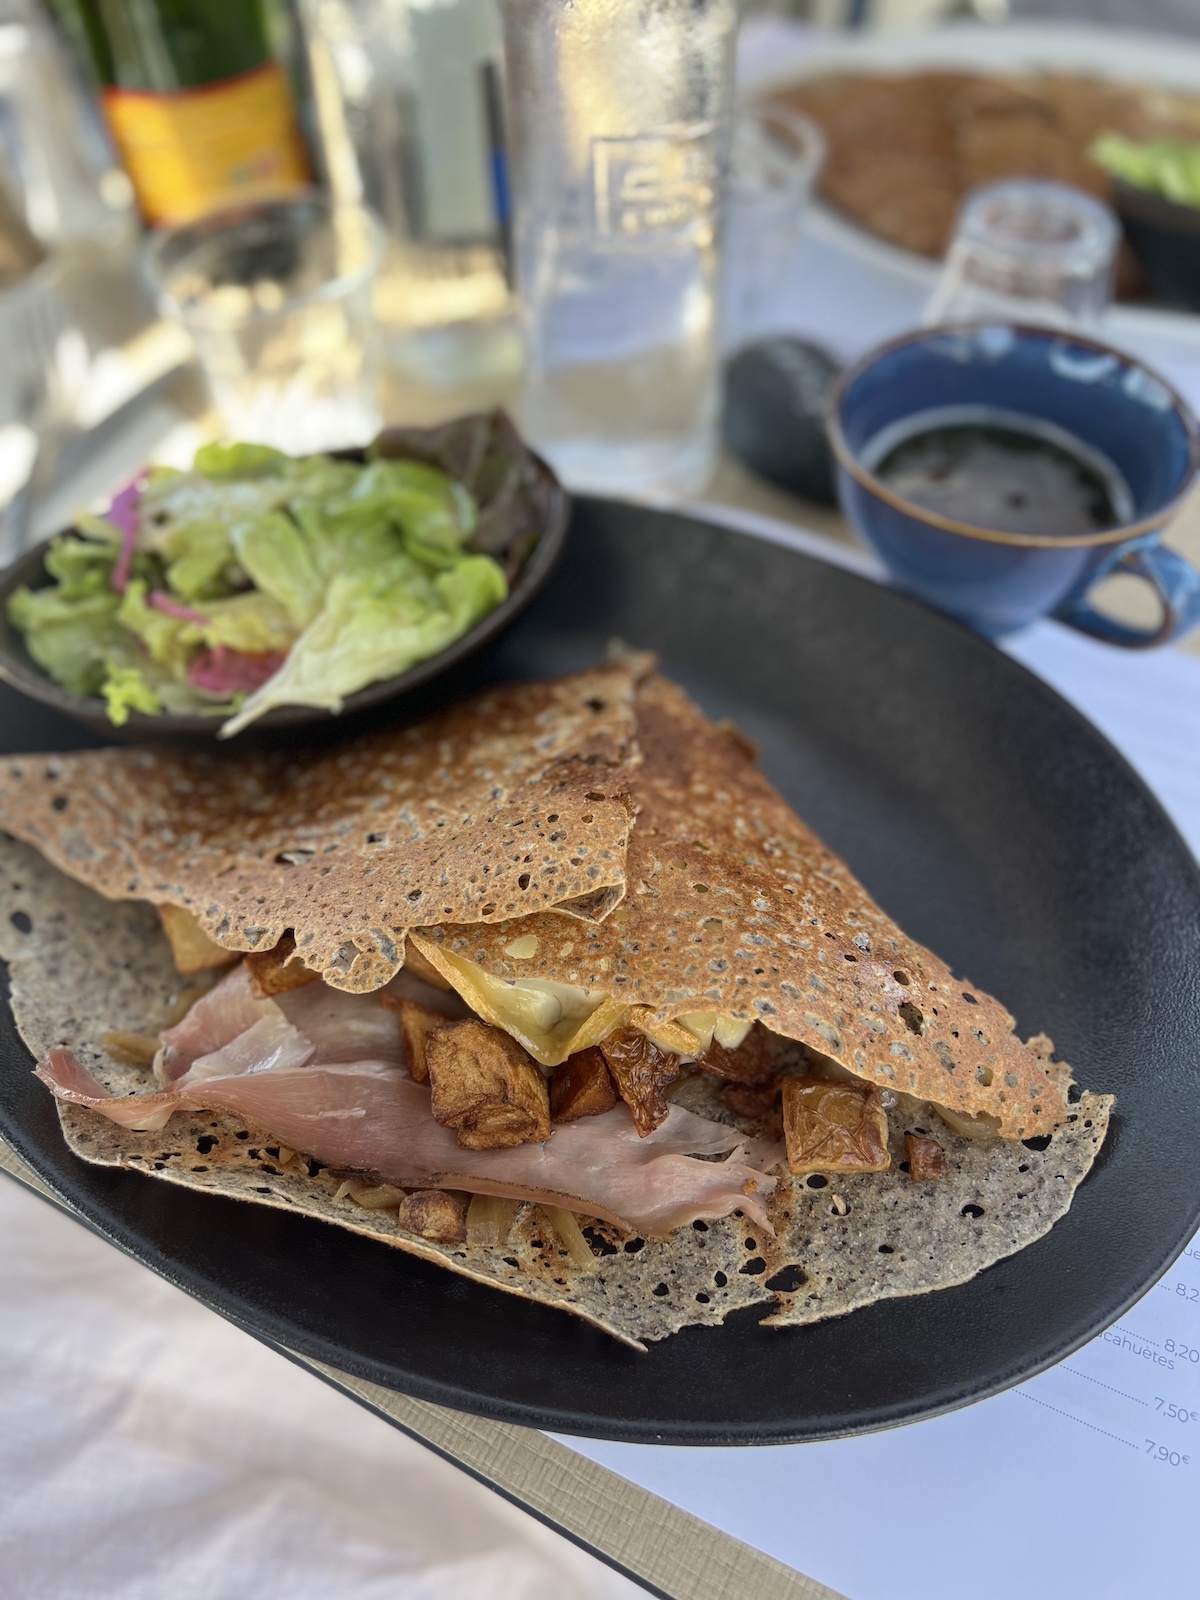 Galette and cider on a plate with salad